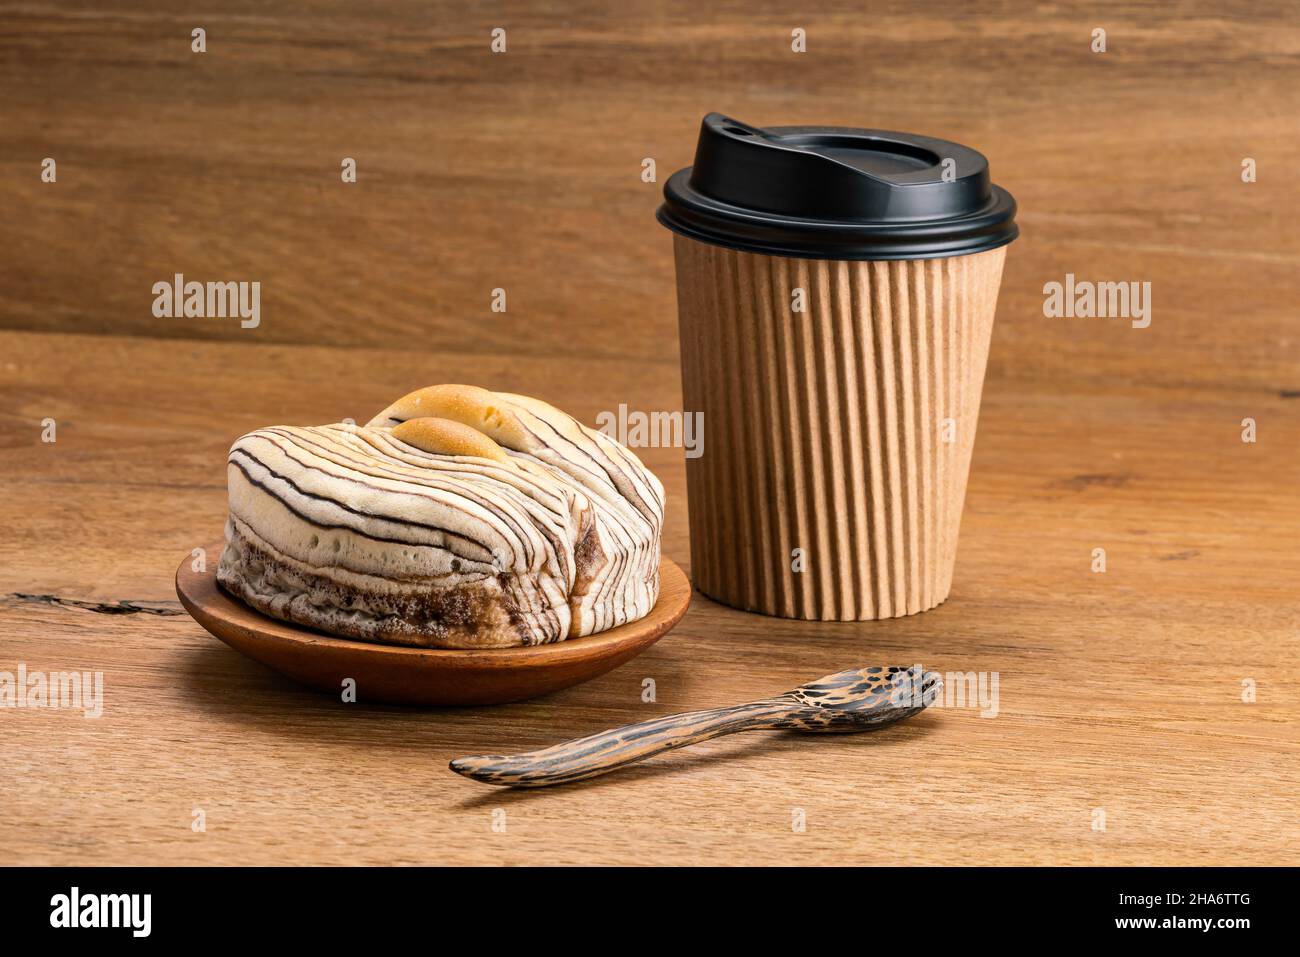 View of delicious breakfast Chocolate Flavored Bread on wooden plate with paper cup of coffee and wooden spoon on a table. Stock Photo